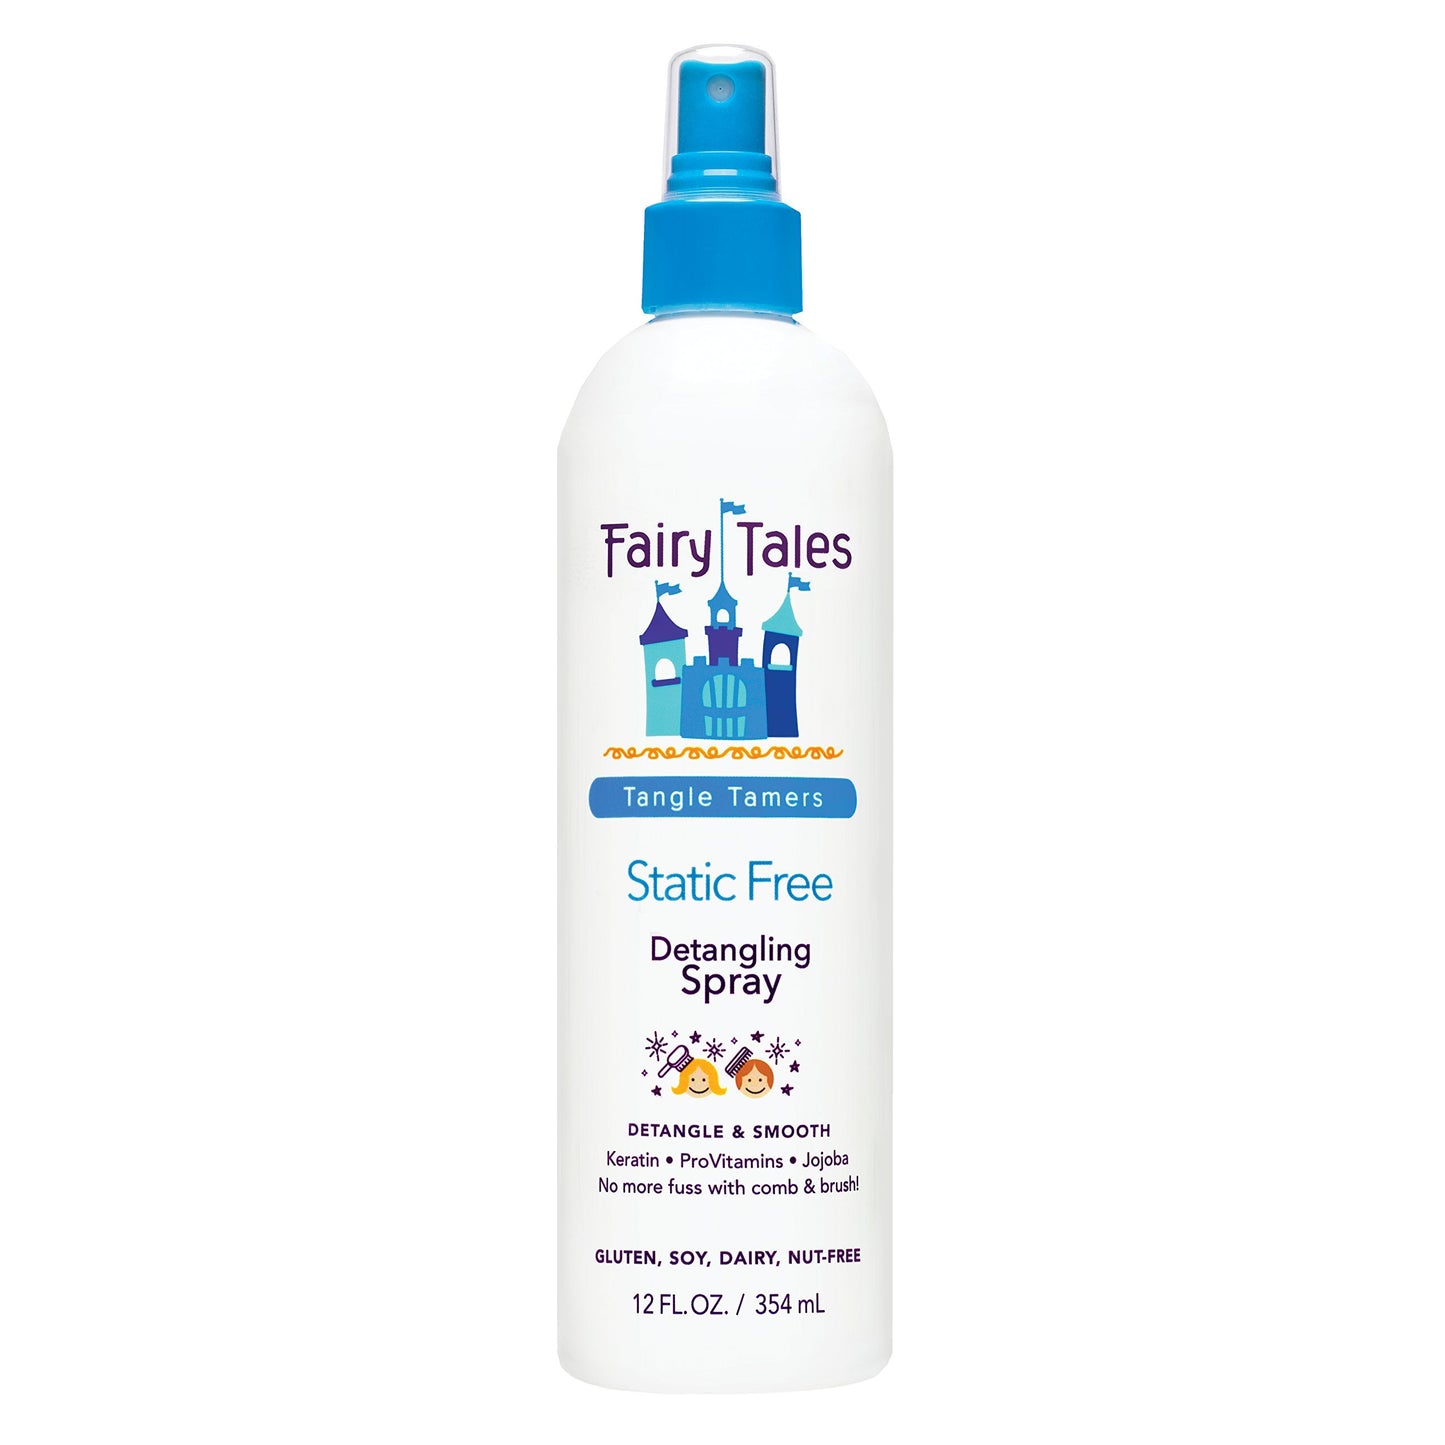 Fairy Tales Tangle Tamer Detangling Spray for Kids - Ultra Moisturizing and Anti Frizz Protection - Paraben Free, Sulfate Free - 12 Oz